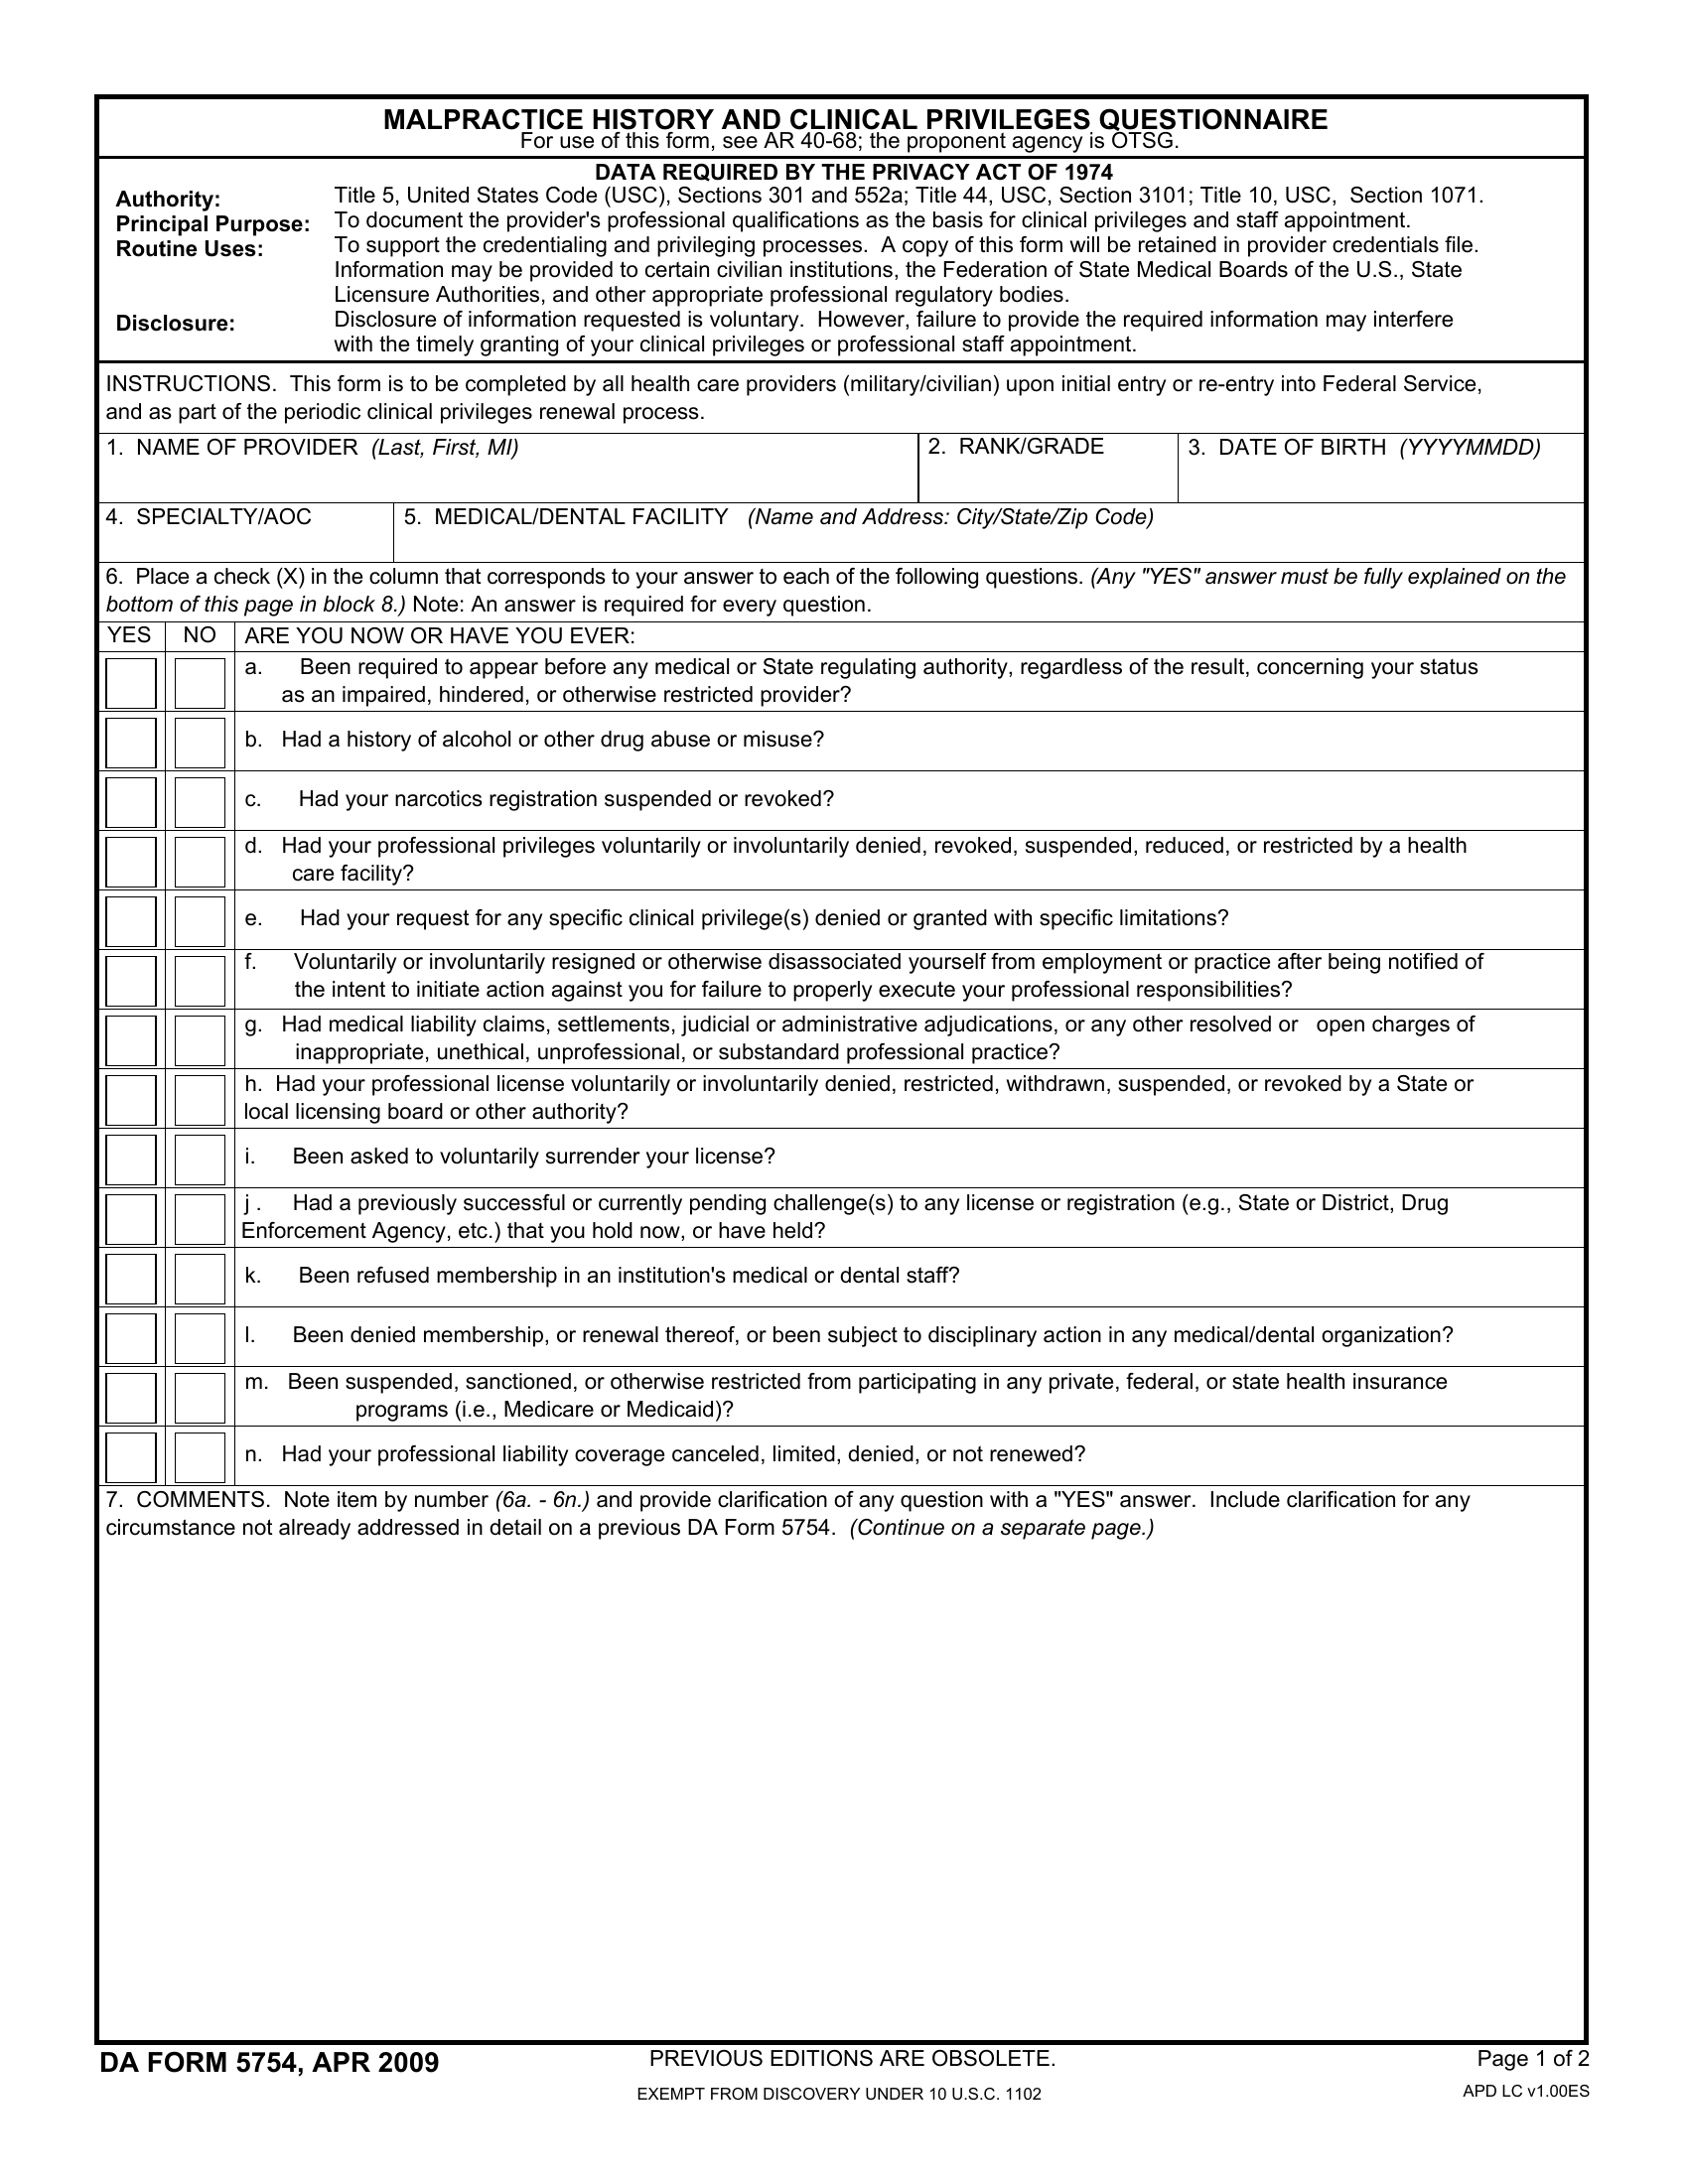 DA Form 5754. Malpractice History and Clinical Privileges Questionnaire